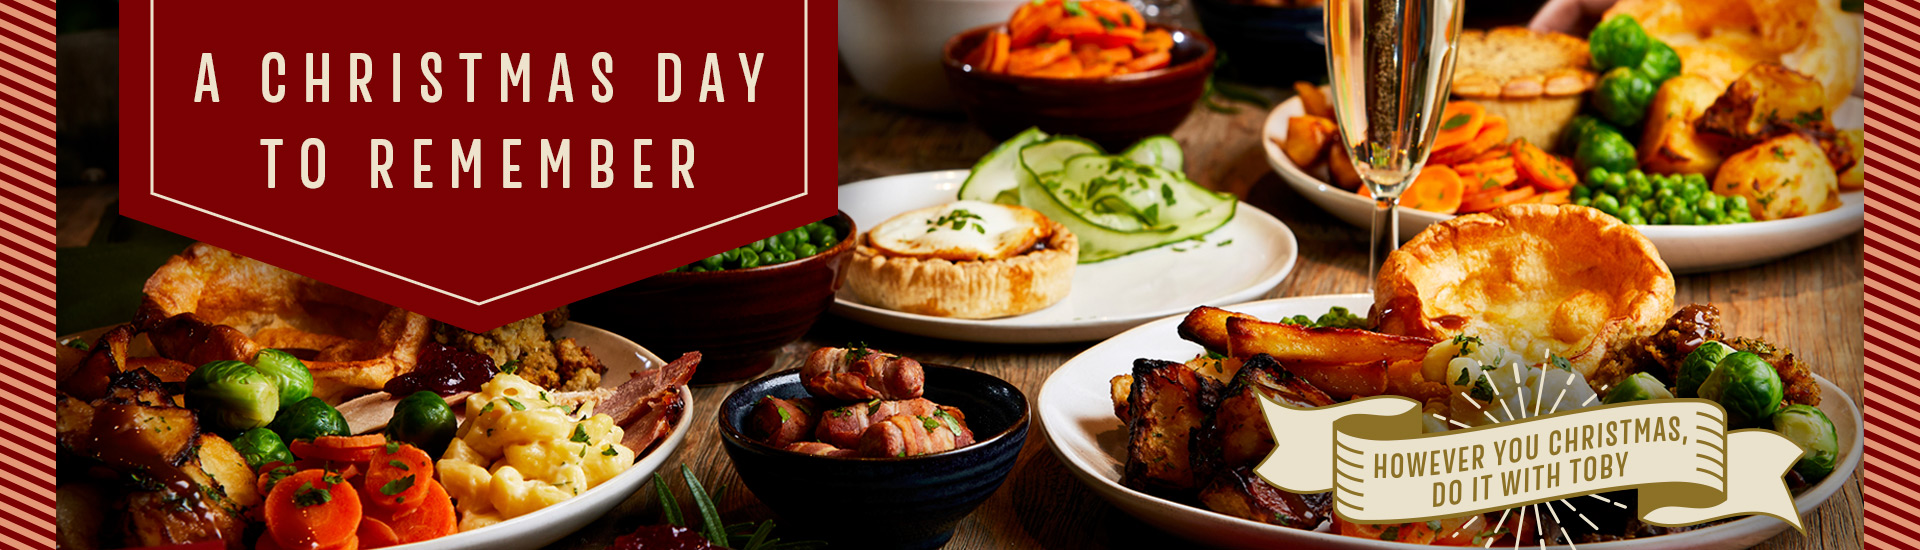 Christmas Day menu at Toby Carvery Colwick Park